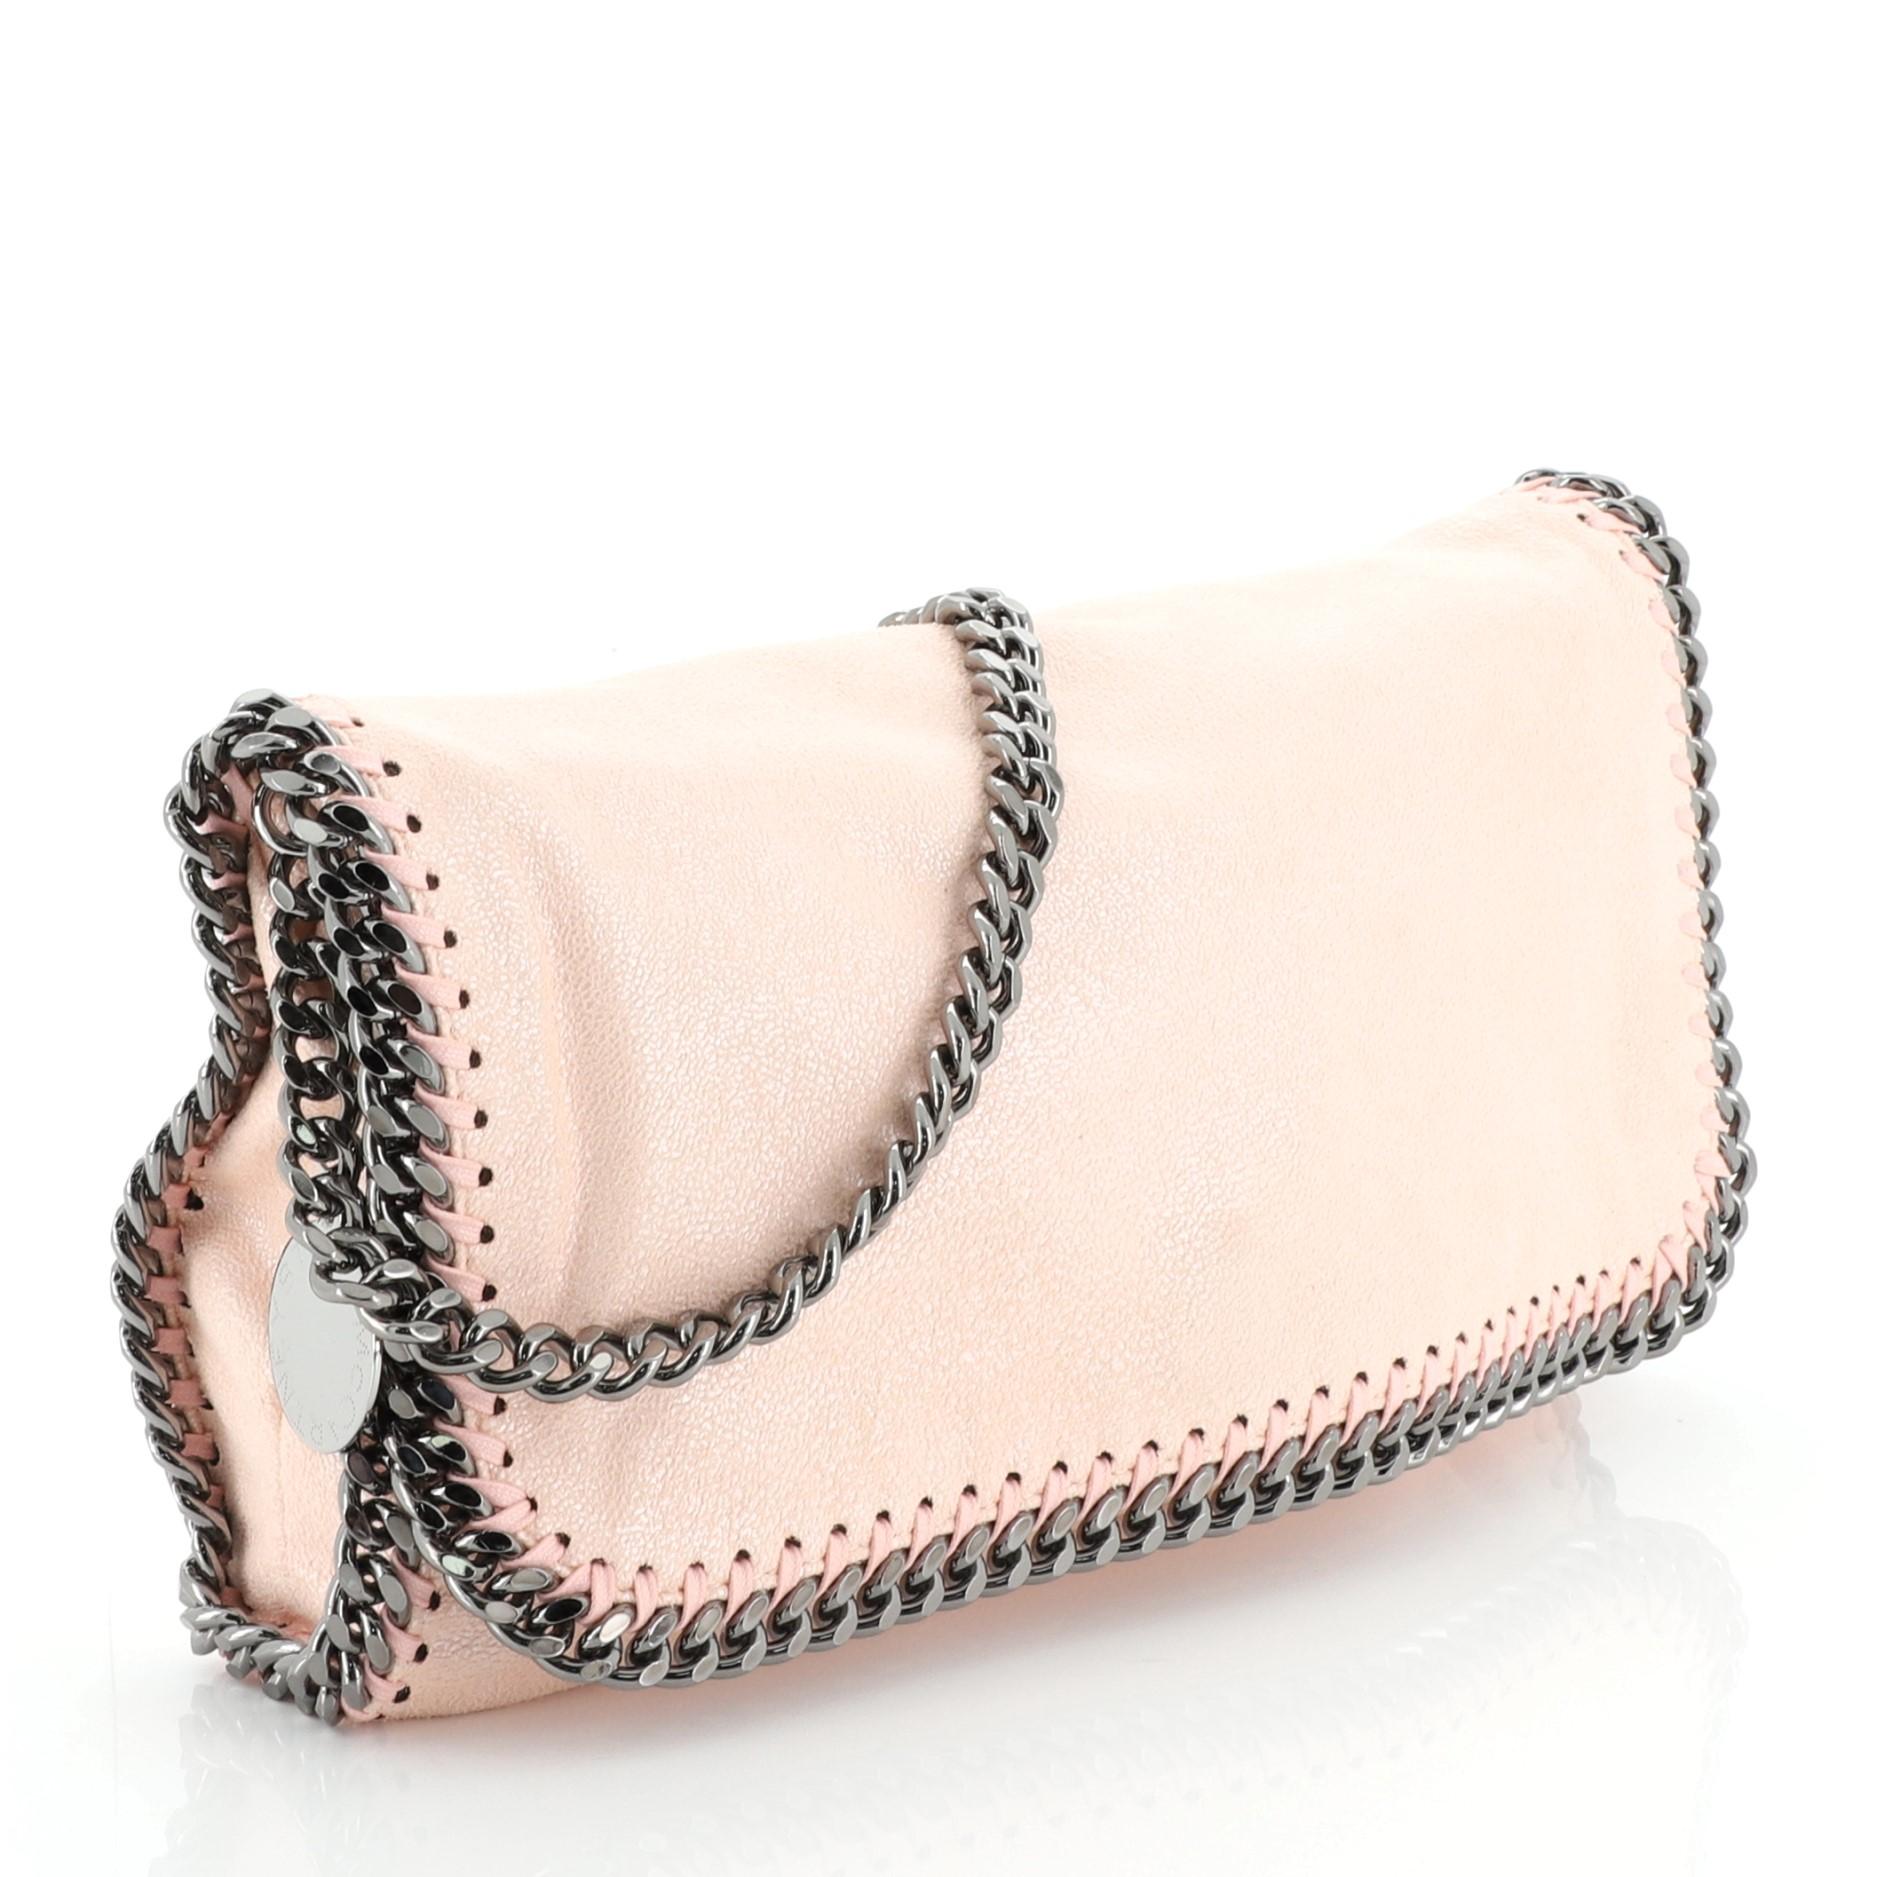 This Stella McCartney Falabella Flap Bag Shaggy Deer Small, crafted in pink shaggy deer, features chain link strap and trim, whipstitched edges, and gunmetal-tone hardware. Its hidden magnetic snap closure opens to a pink fabric interior with slip